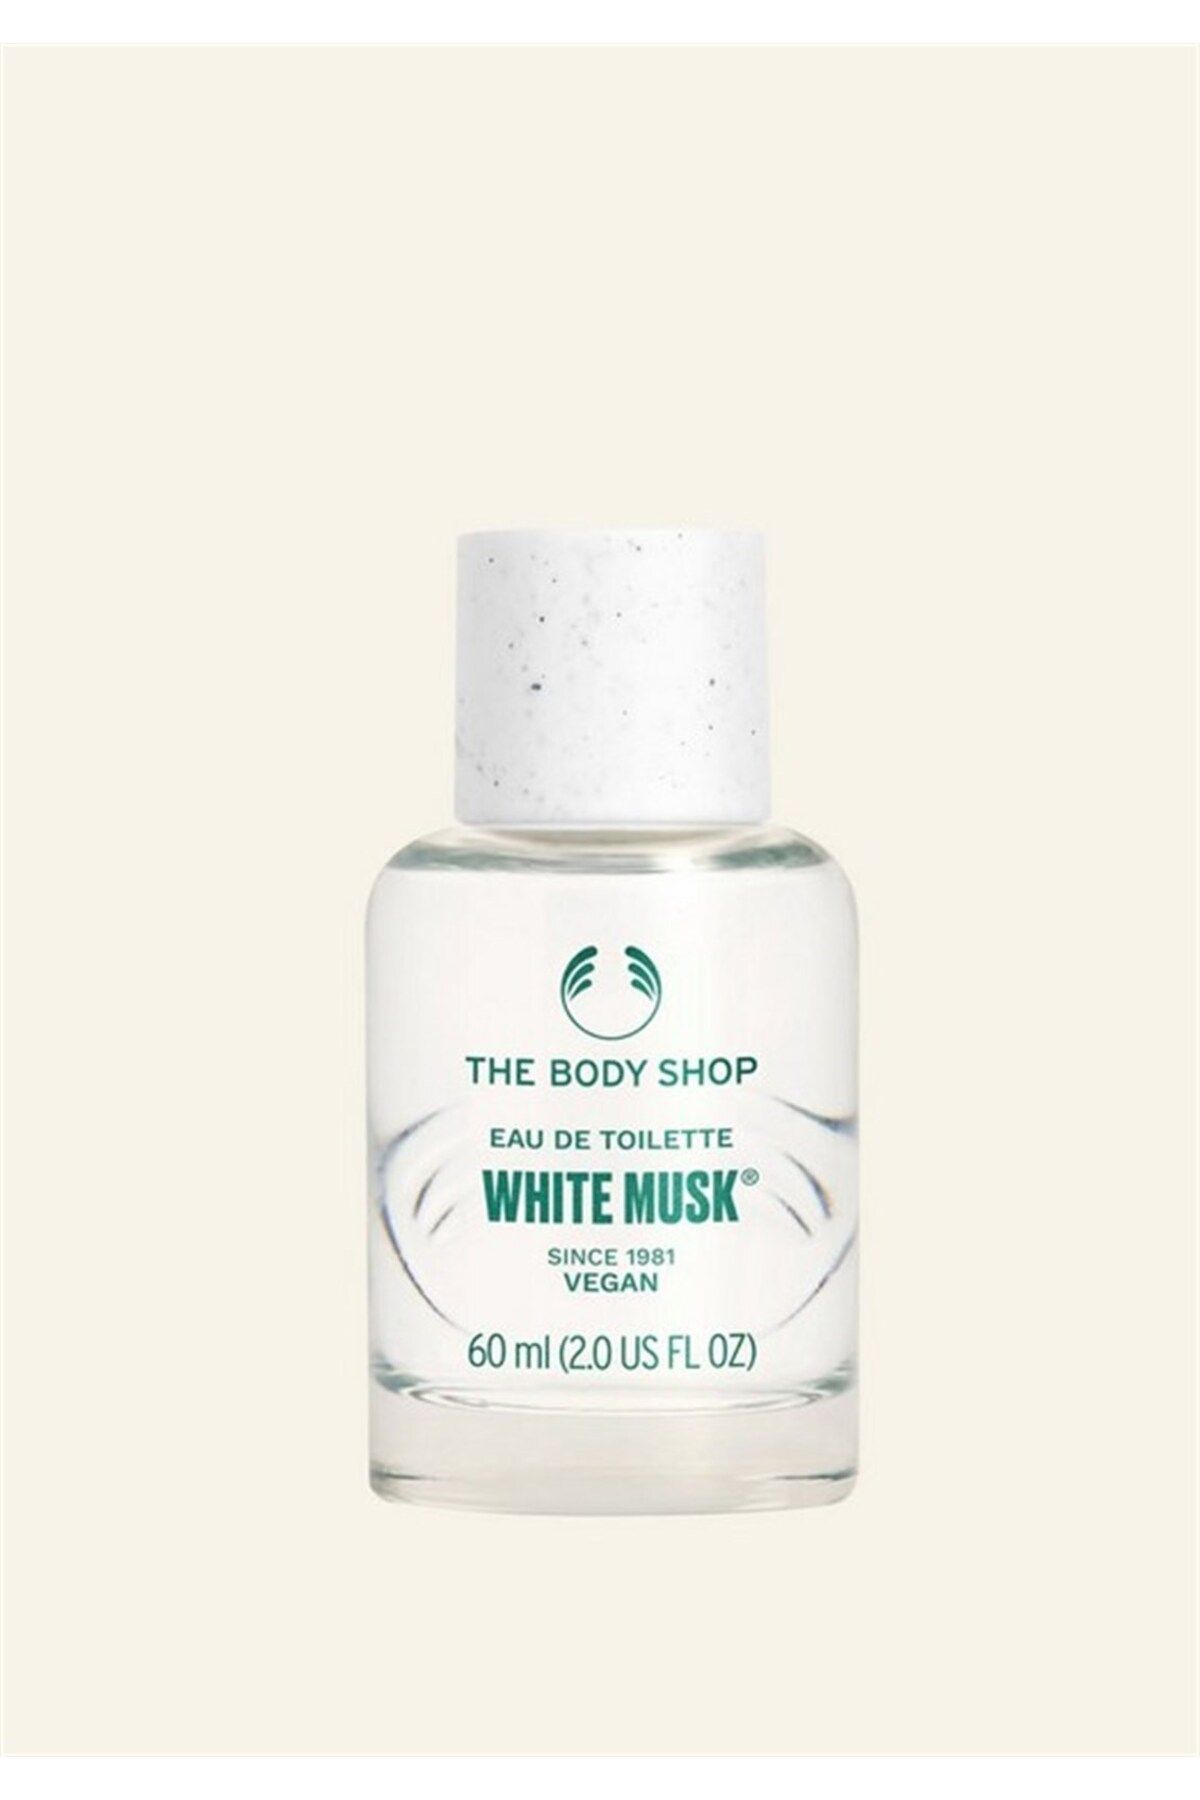 THE BODY SHOP ادو تویلت سفید Musk®